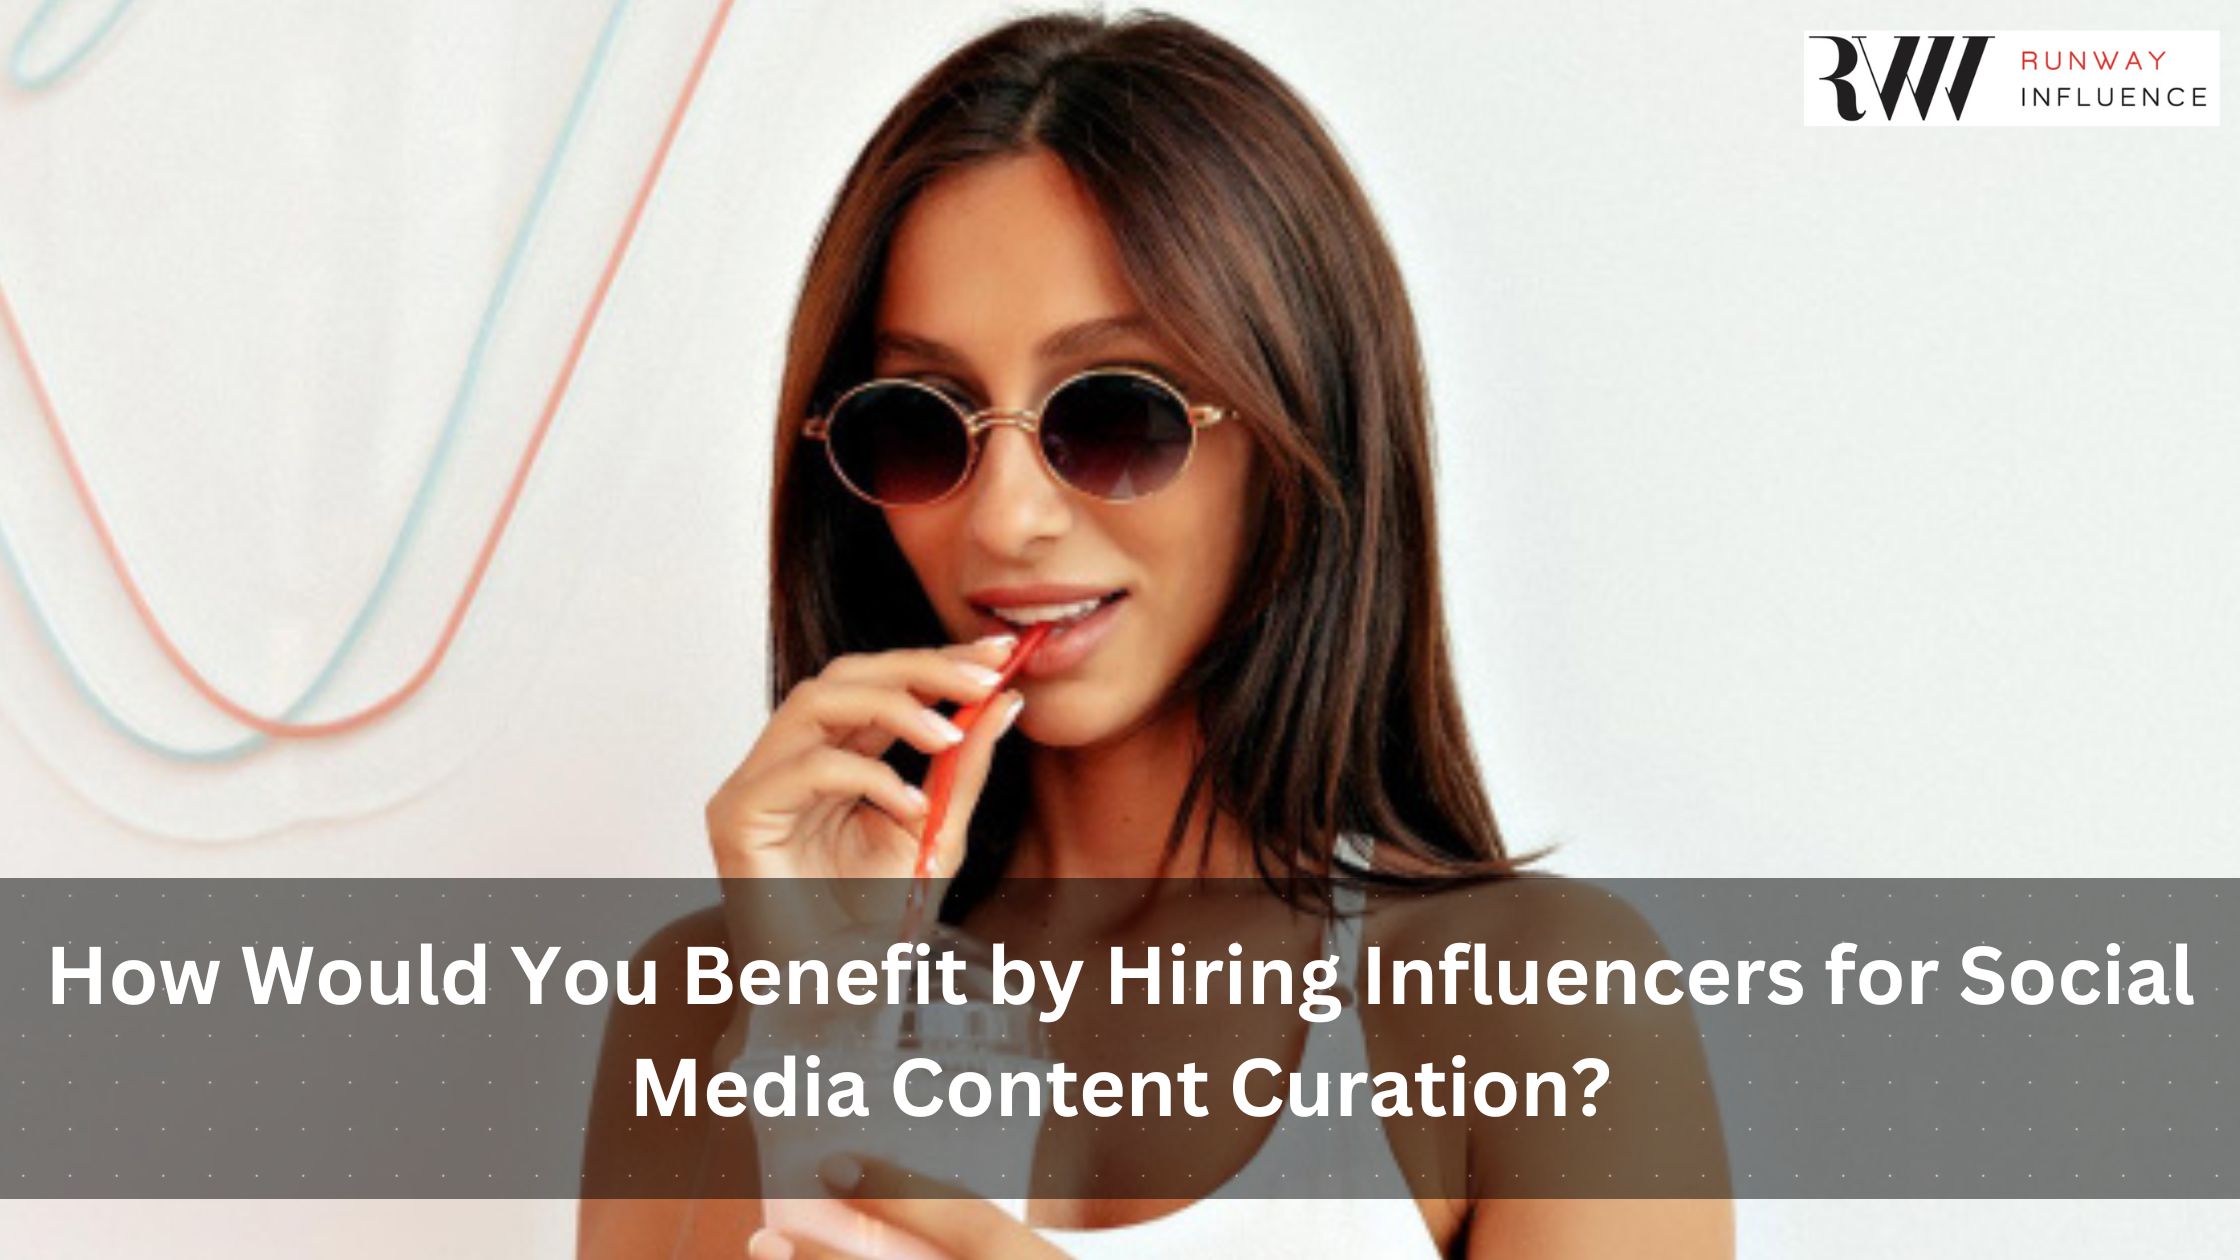 How Would You Benefit by Hiring Influencers for Social Media Content Curation?